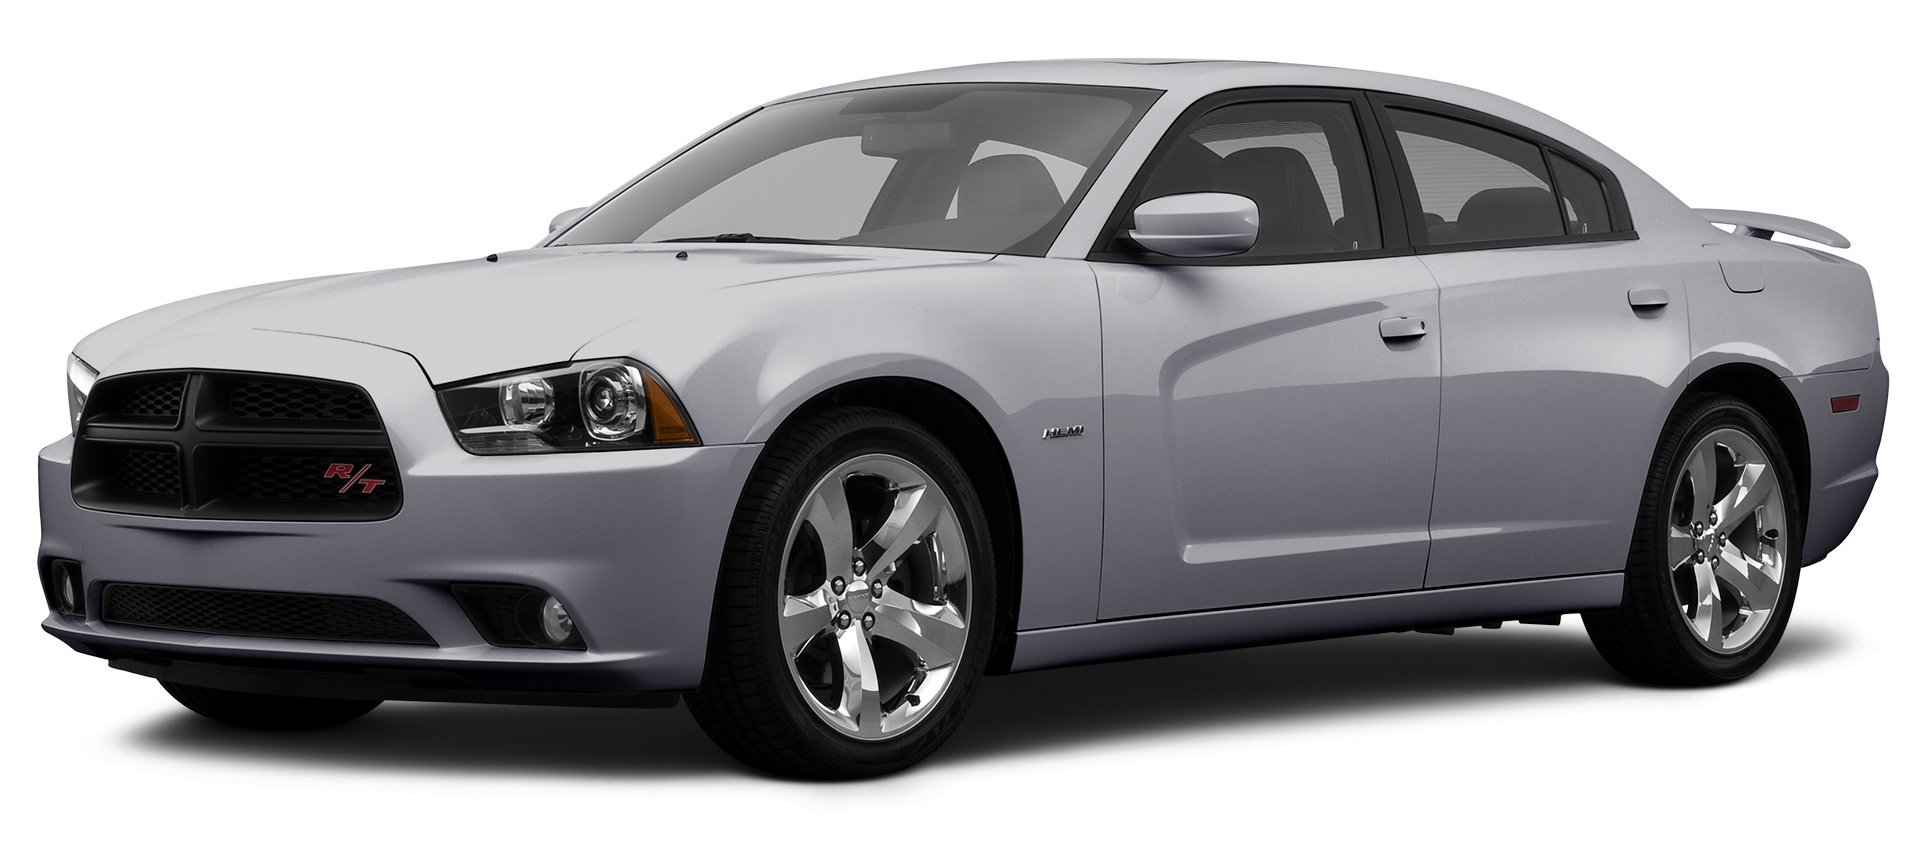 2013 dodge charger rt review